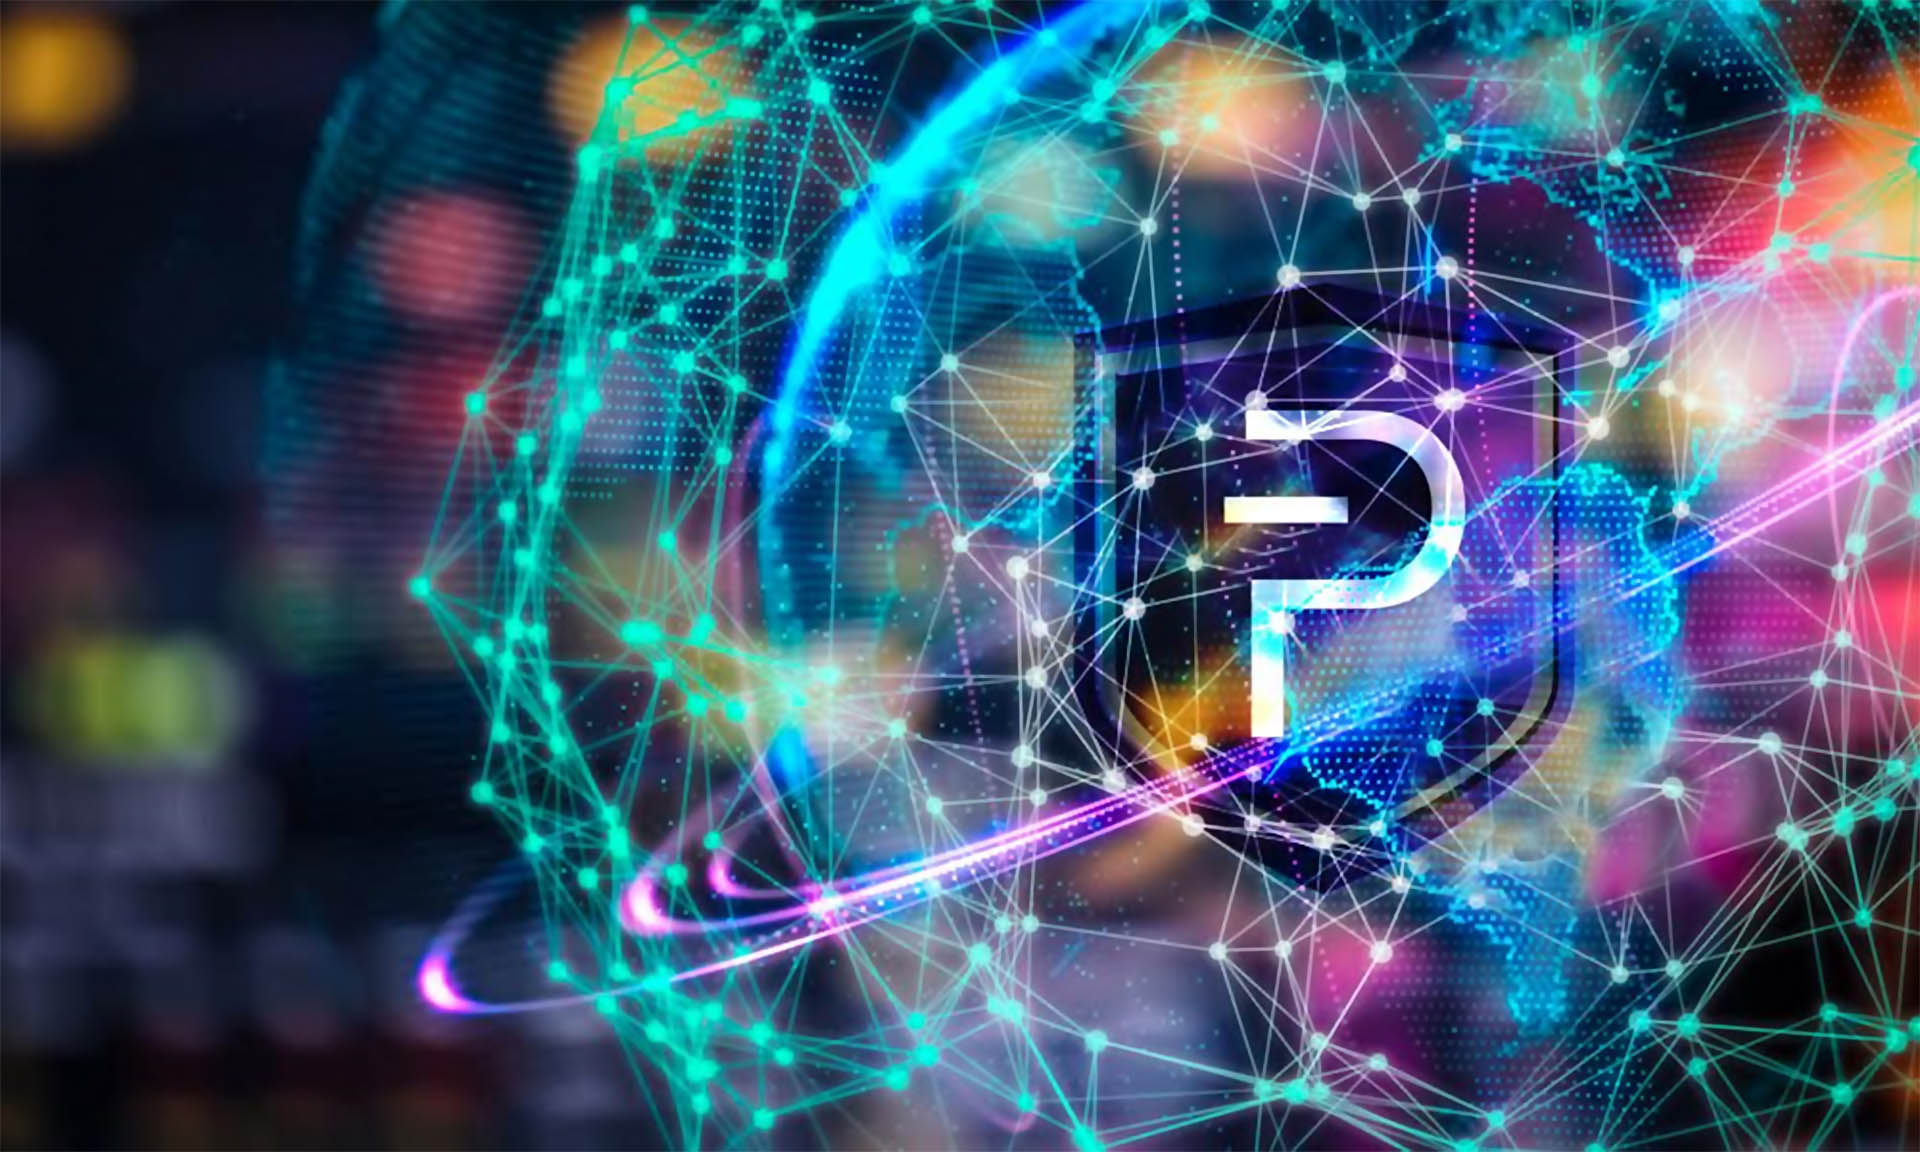 PIVX Seeks To Improve Privacy With Zerocoin Protocol Integration